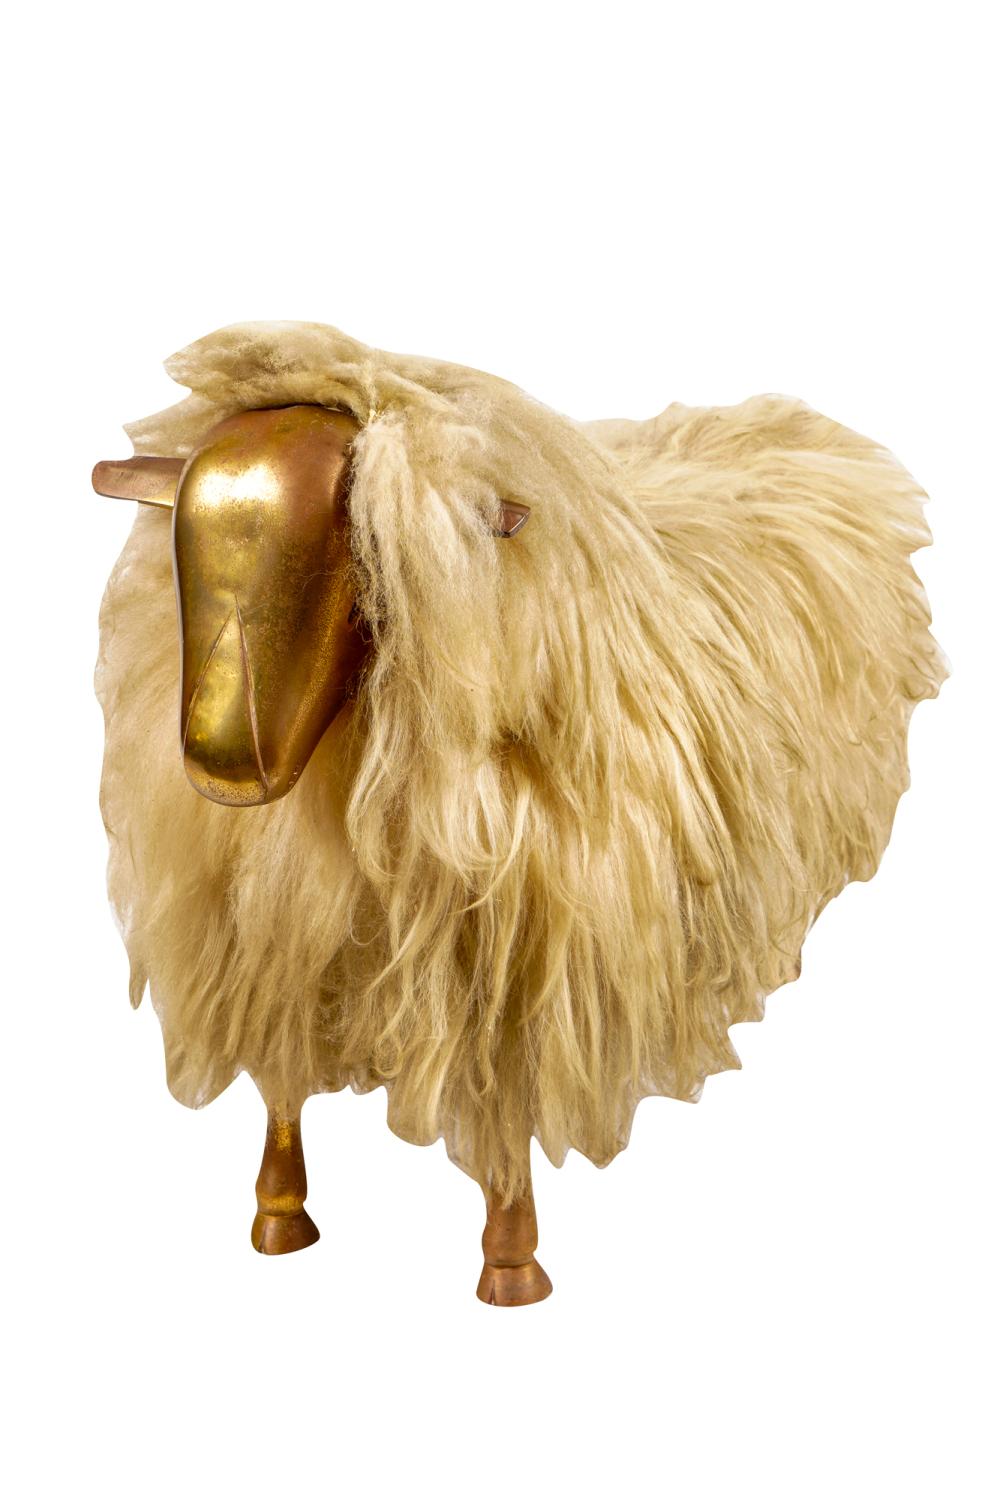 LALANNE STYLE SHEEPin the style 336feb